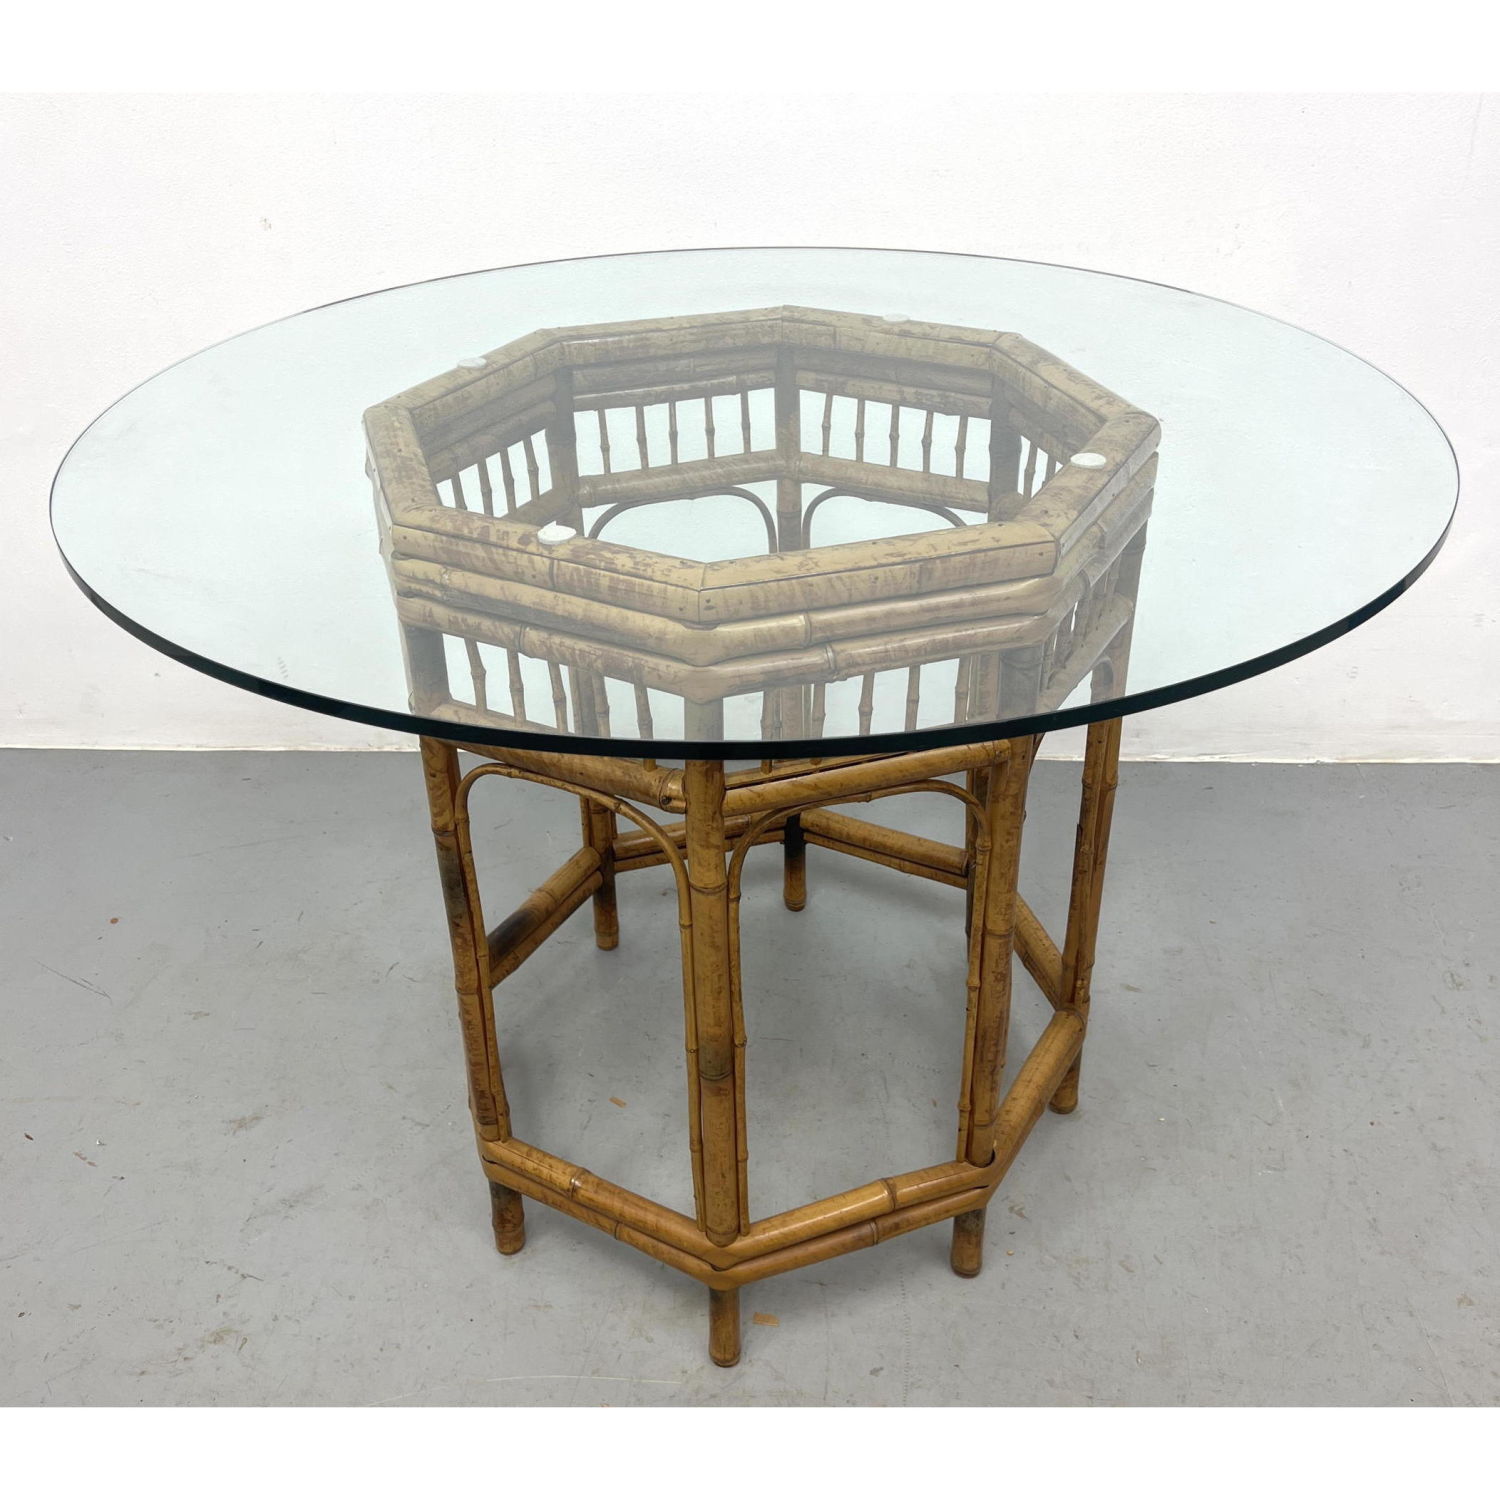 McGUIRE Style Bamboo Dining Table 2ff7ea